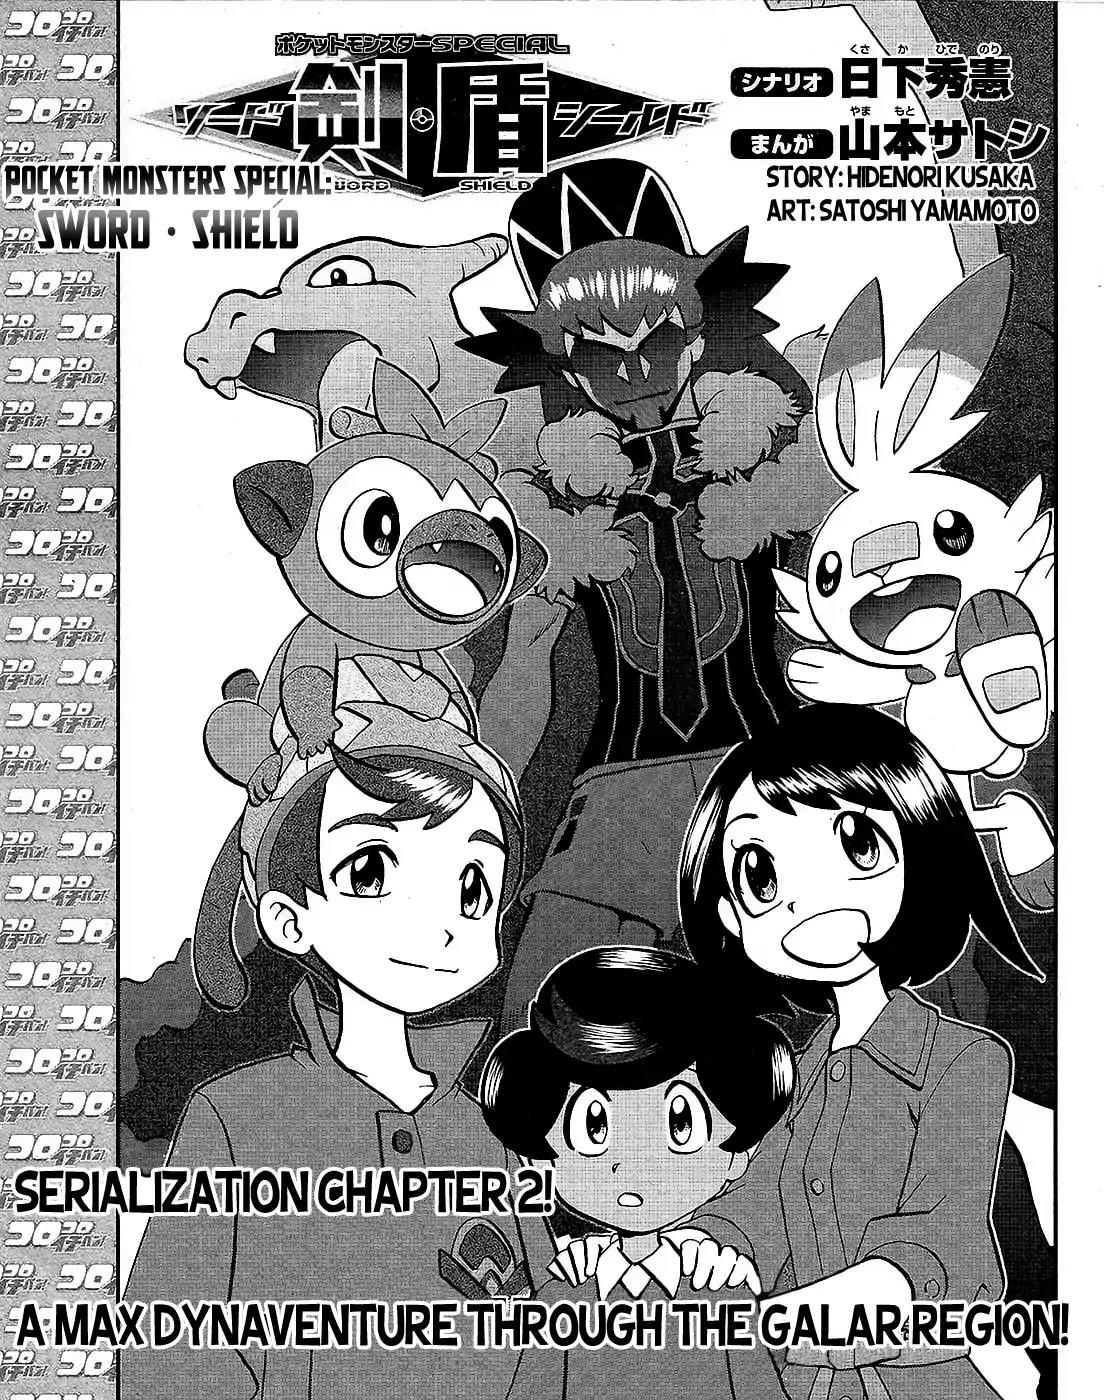 Pokemon SPECIAL Sword and Shield Chapter 2